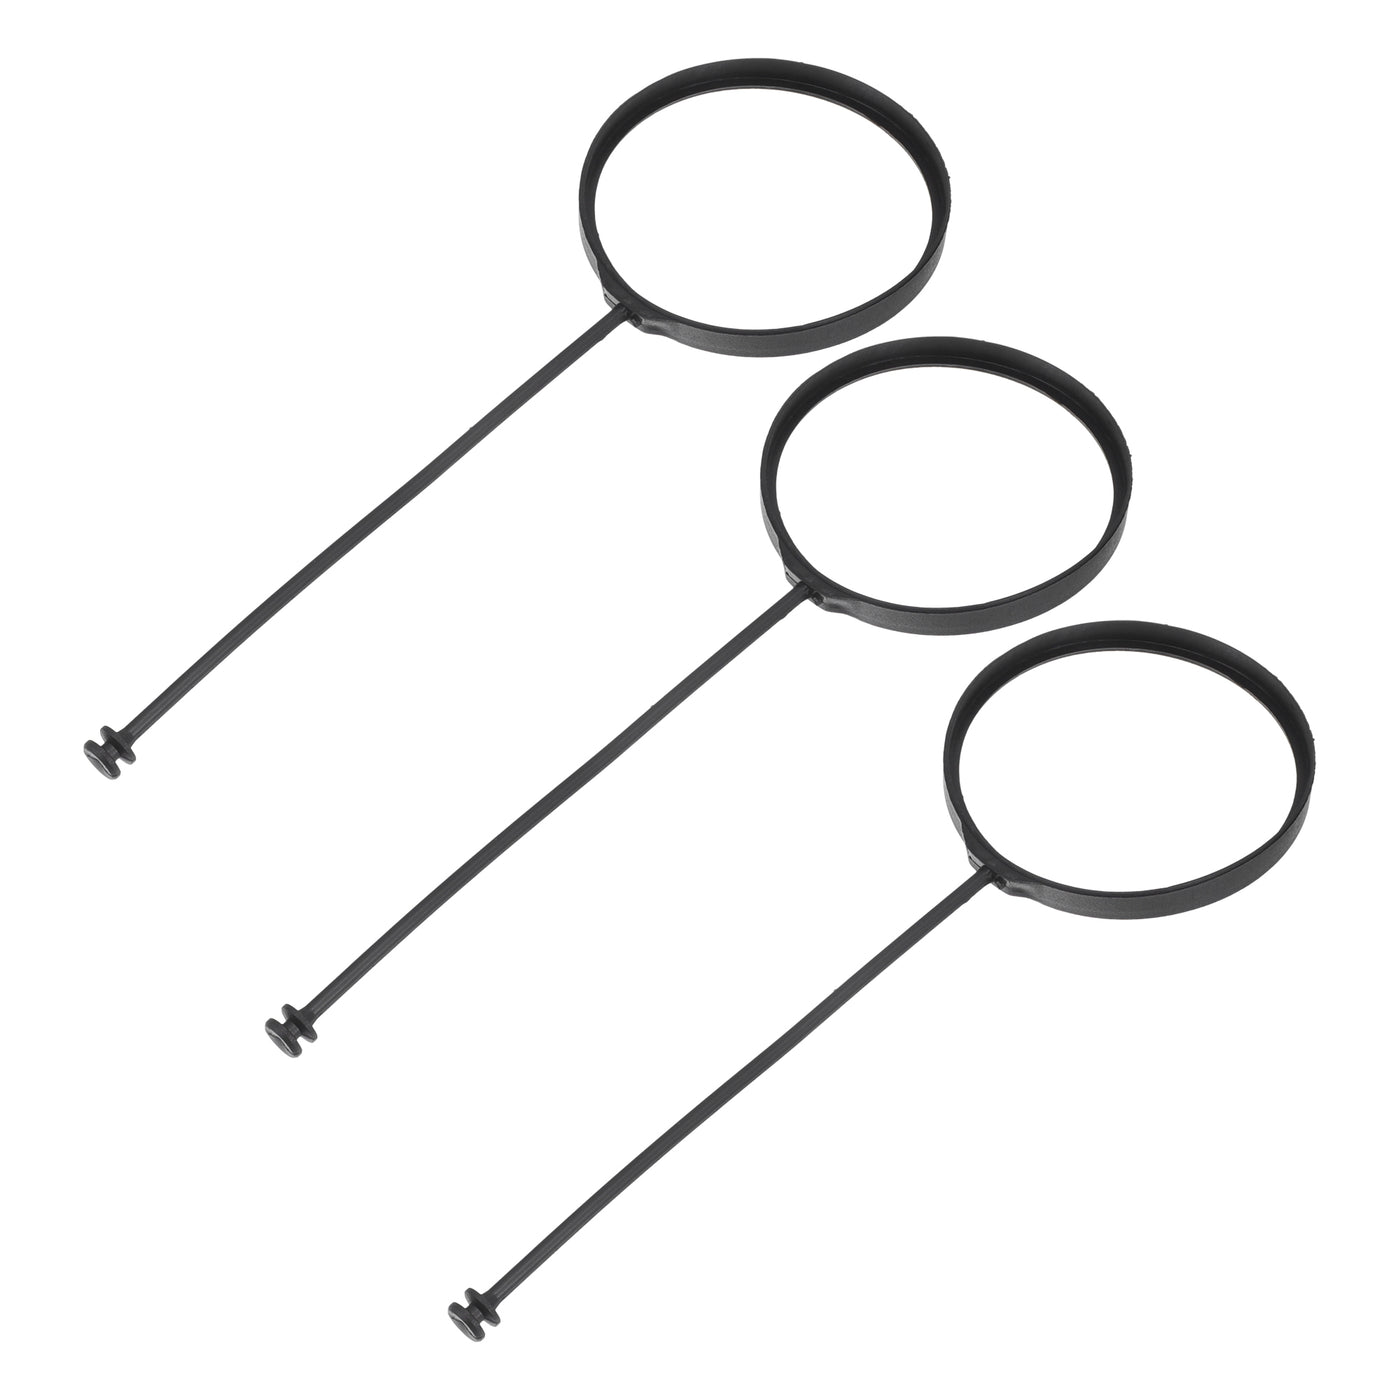 ACROPIX Fuel Tank Cap Tether Fuel Tank Rope Replacement Fit for BMW X6 2008-2018 No.16117222391/16116756772 - Pack of 3